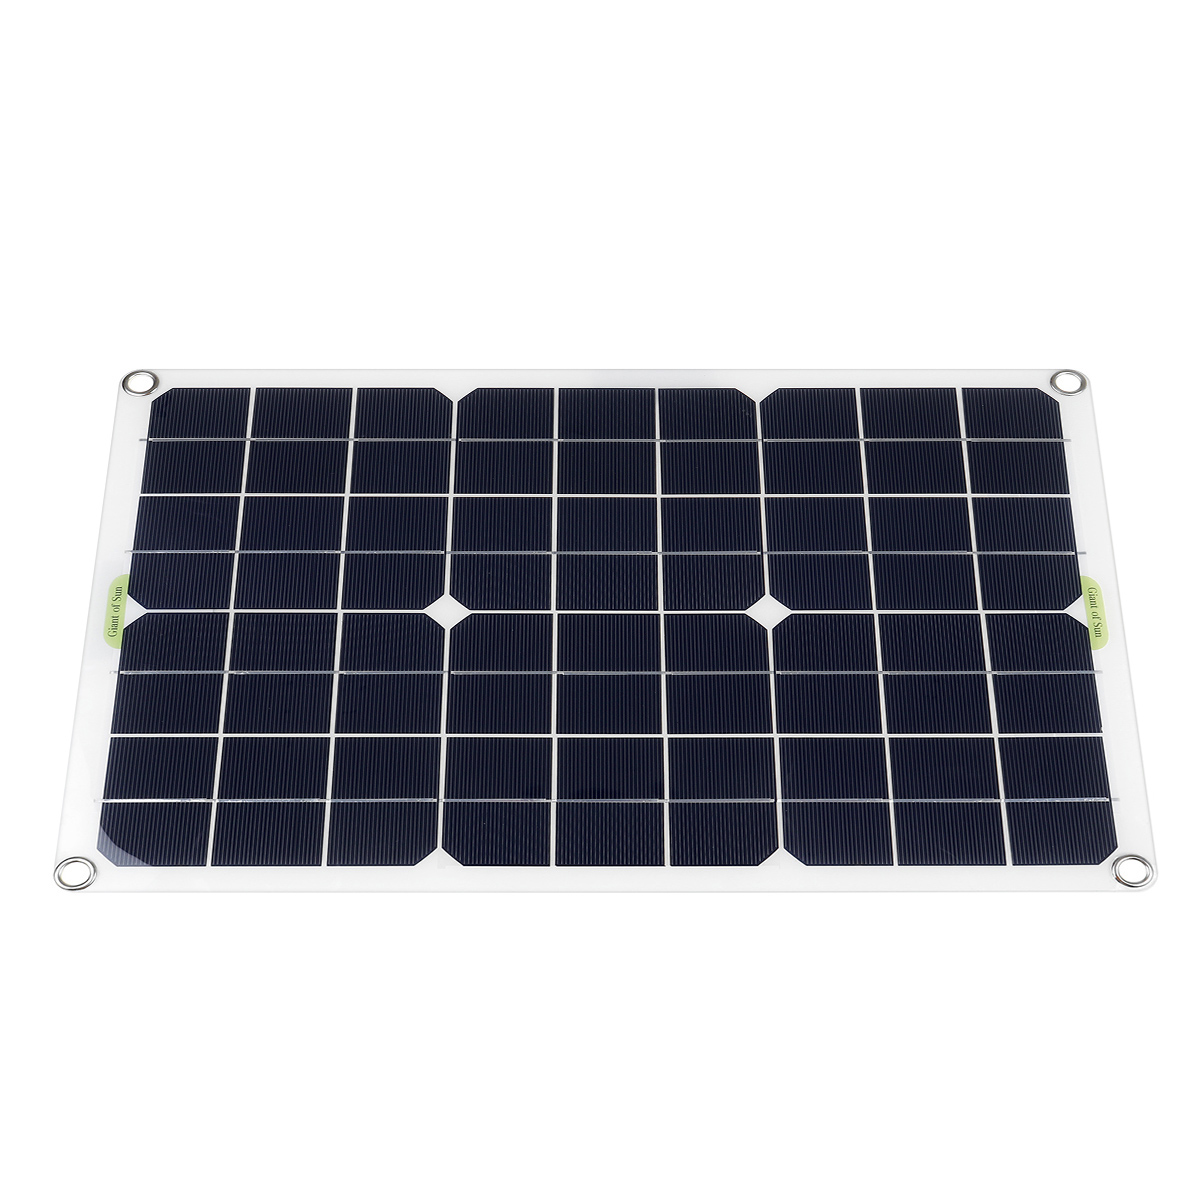 50W-Solar-Panel-Kit-18V-Battery-Charger-1020304050A-Controller-DCUSBTYPE-C-For-Outdoor-Camping-Acces-1780843-11